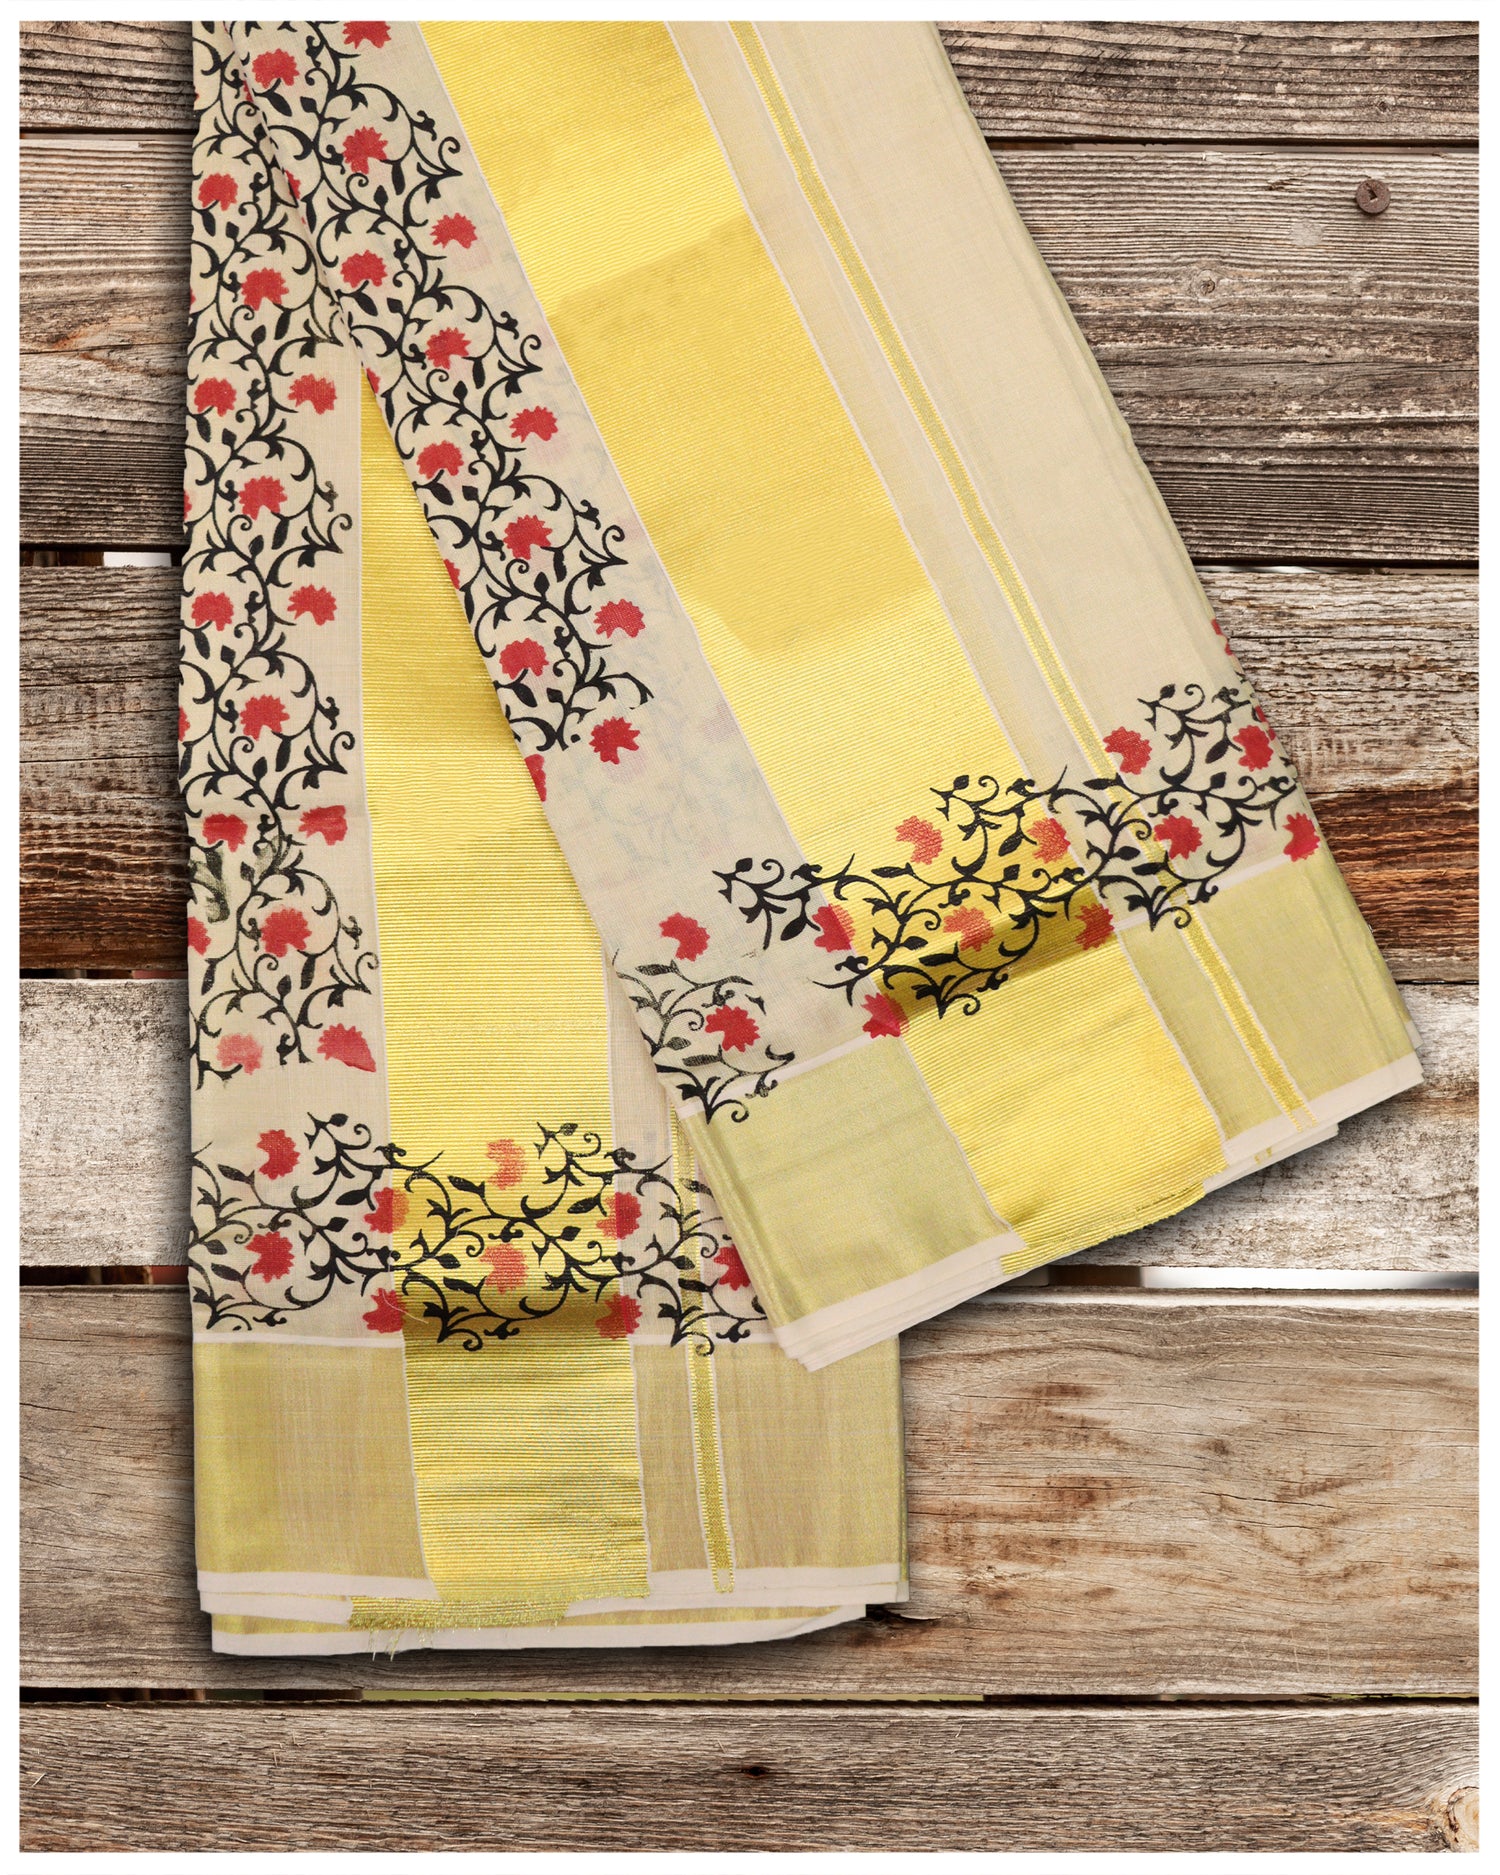 Wear traditional style with the Golden Tissue Set Mundu With Golden Kara And Floral Print. The tissue fabric is stylishly designed with a golden tissue set mundu, golden kara set mundu, and an attractive floral print. It is perfect for festive occasions and makes an eye-catching traditional look.